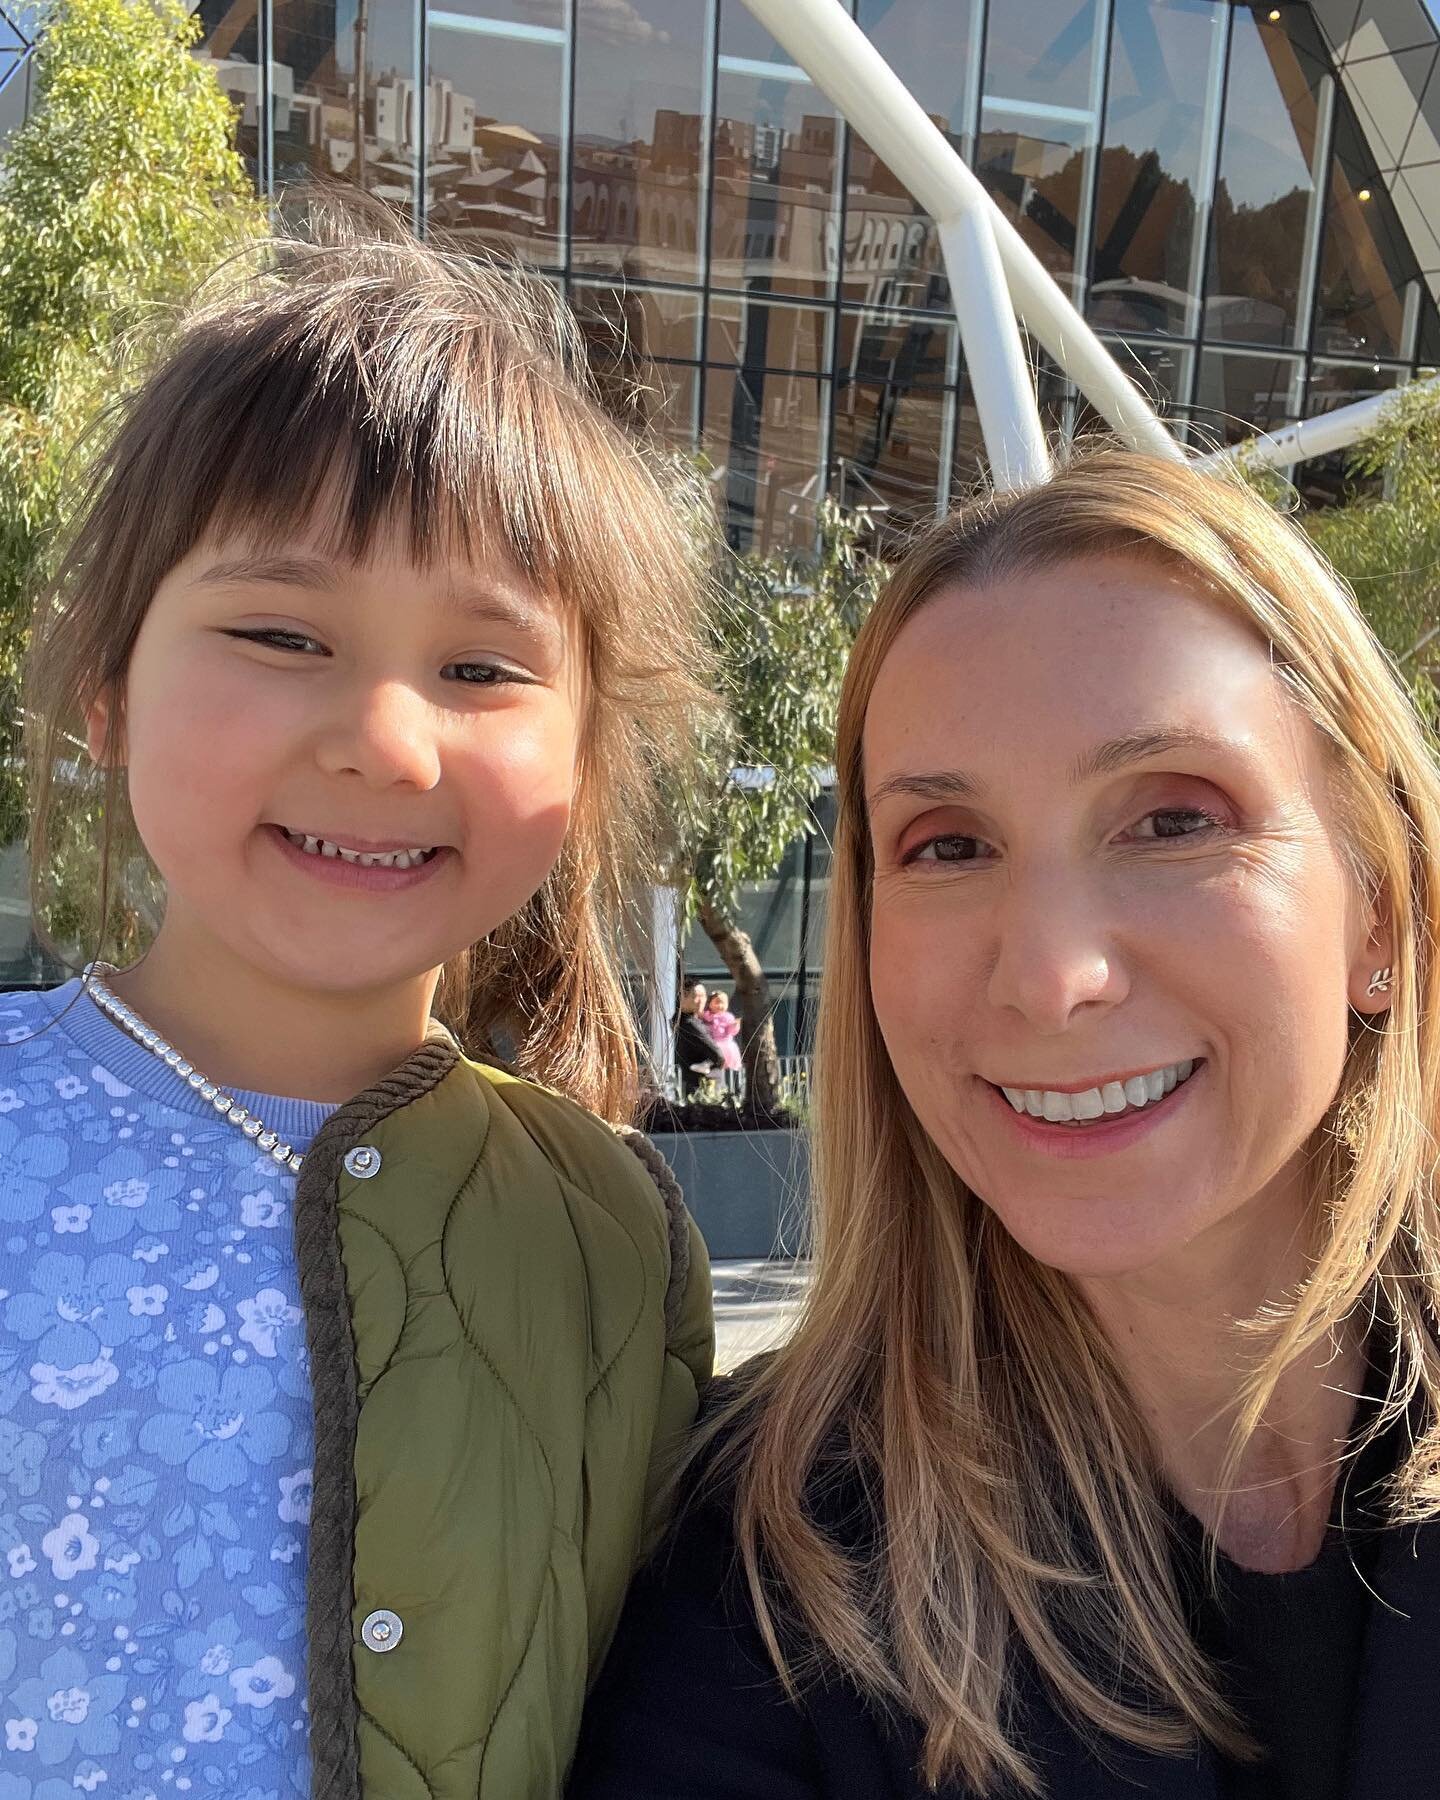 At @racarena this morning for the amazing Disney on Ice! ⛸️❄️ Kids everywhere in the city! Great to see young and old having so much fun.

I&rsquo;m pretty sure I saw Disney on Ice in the 80s! Incredible how some things stand the test of time. 

#dis